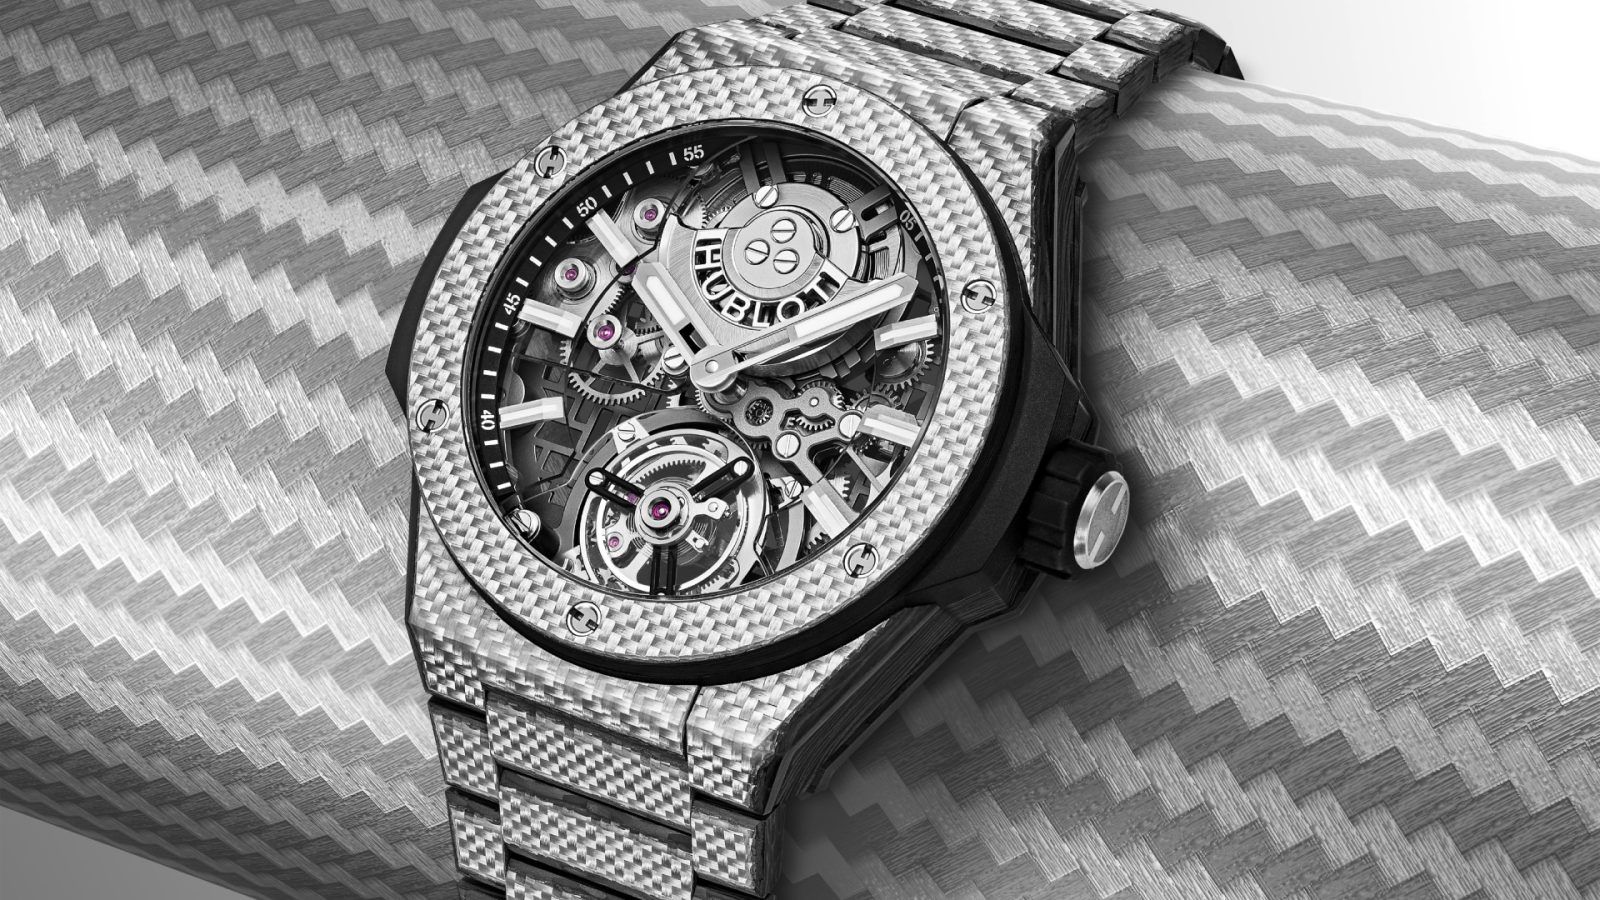 Hublot unveils new range of high-end watches